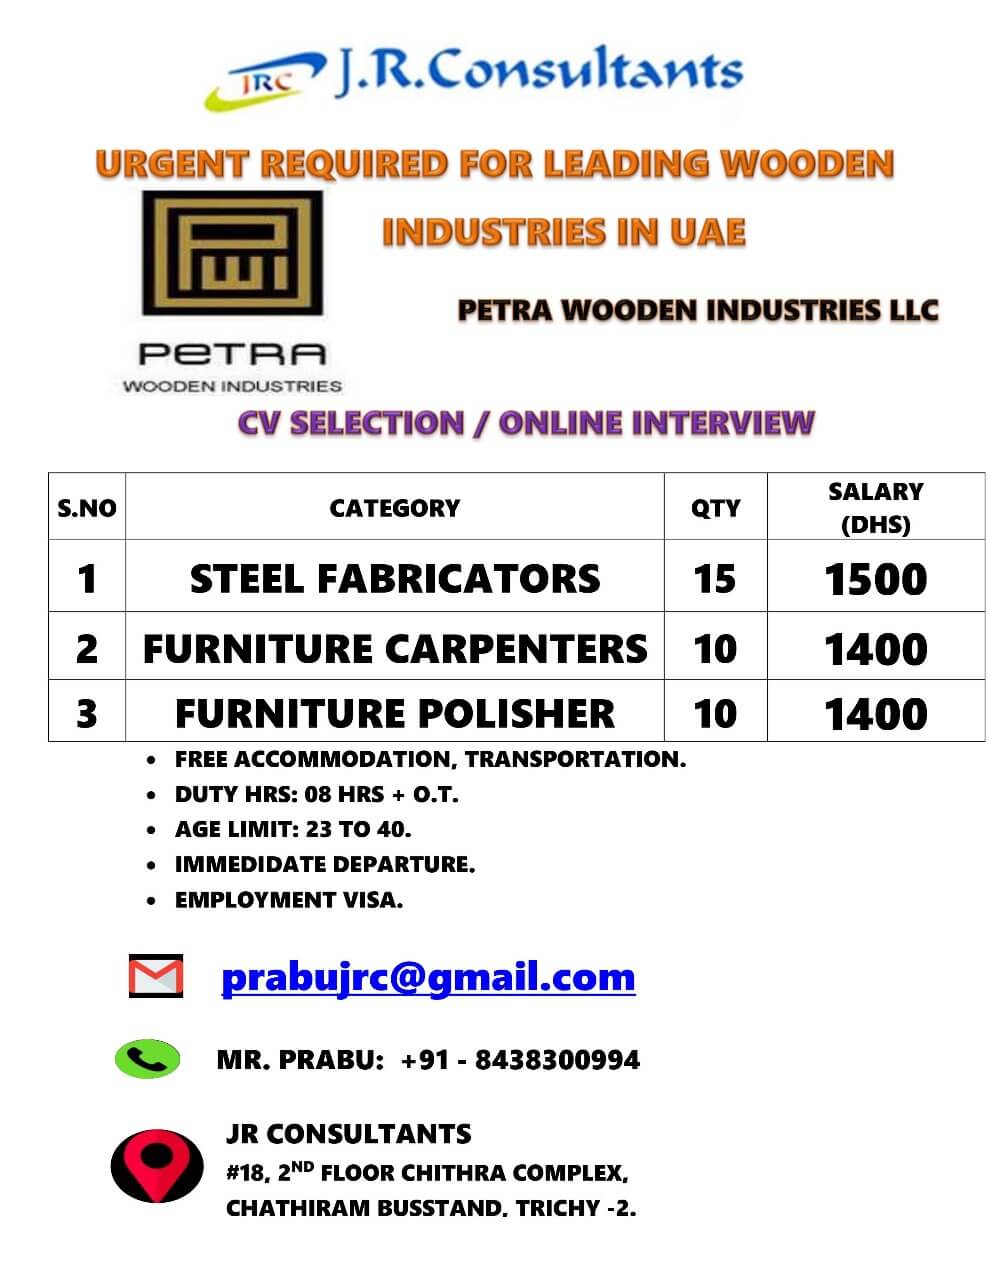 A URGENT REQUIREMENT FOR  A LEADING WOODERN FURNITURE MANUFACTURING COMPANY- DUBAI